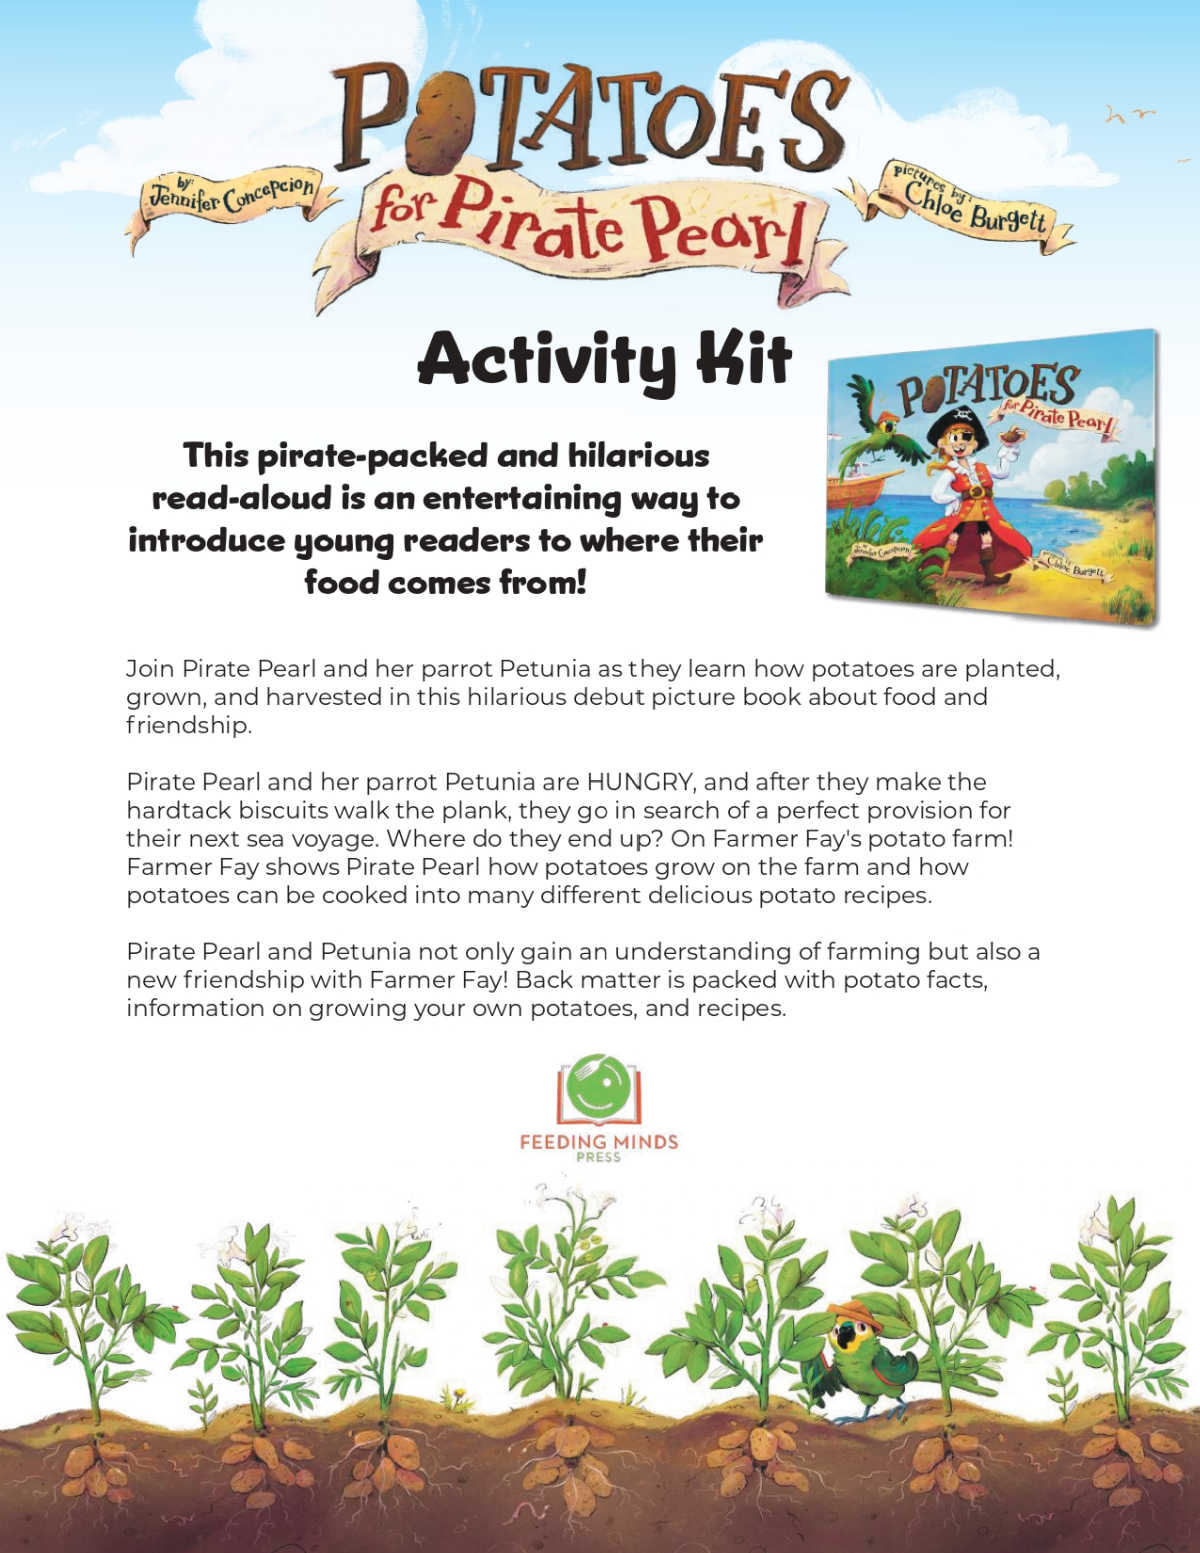 Free printable pirate activity pages, inspired by the children's book "Potatoes for Pirate Pearl," are perfect for adventurous kids. The pages include coloring pages, a maze, a word search, and more.